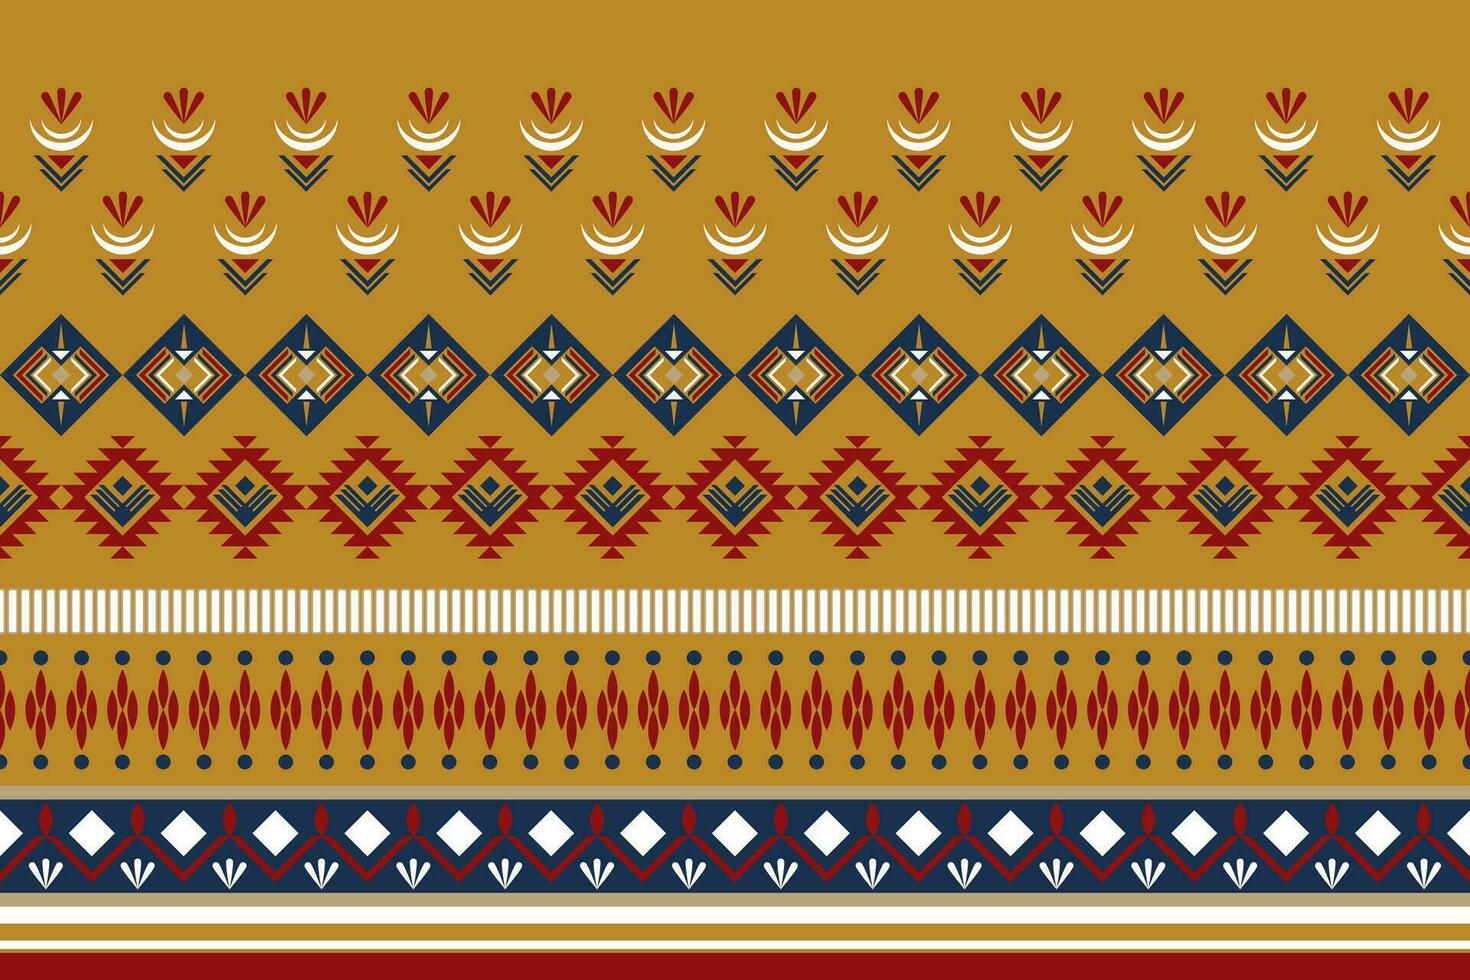 Geometric ethnic pattern traditional Design for background, carpet, wallpaper, clothing, wrapping, Batik, fabric, Vector illustration embroidery style.